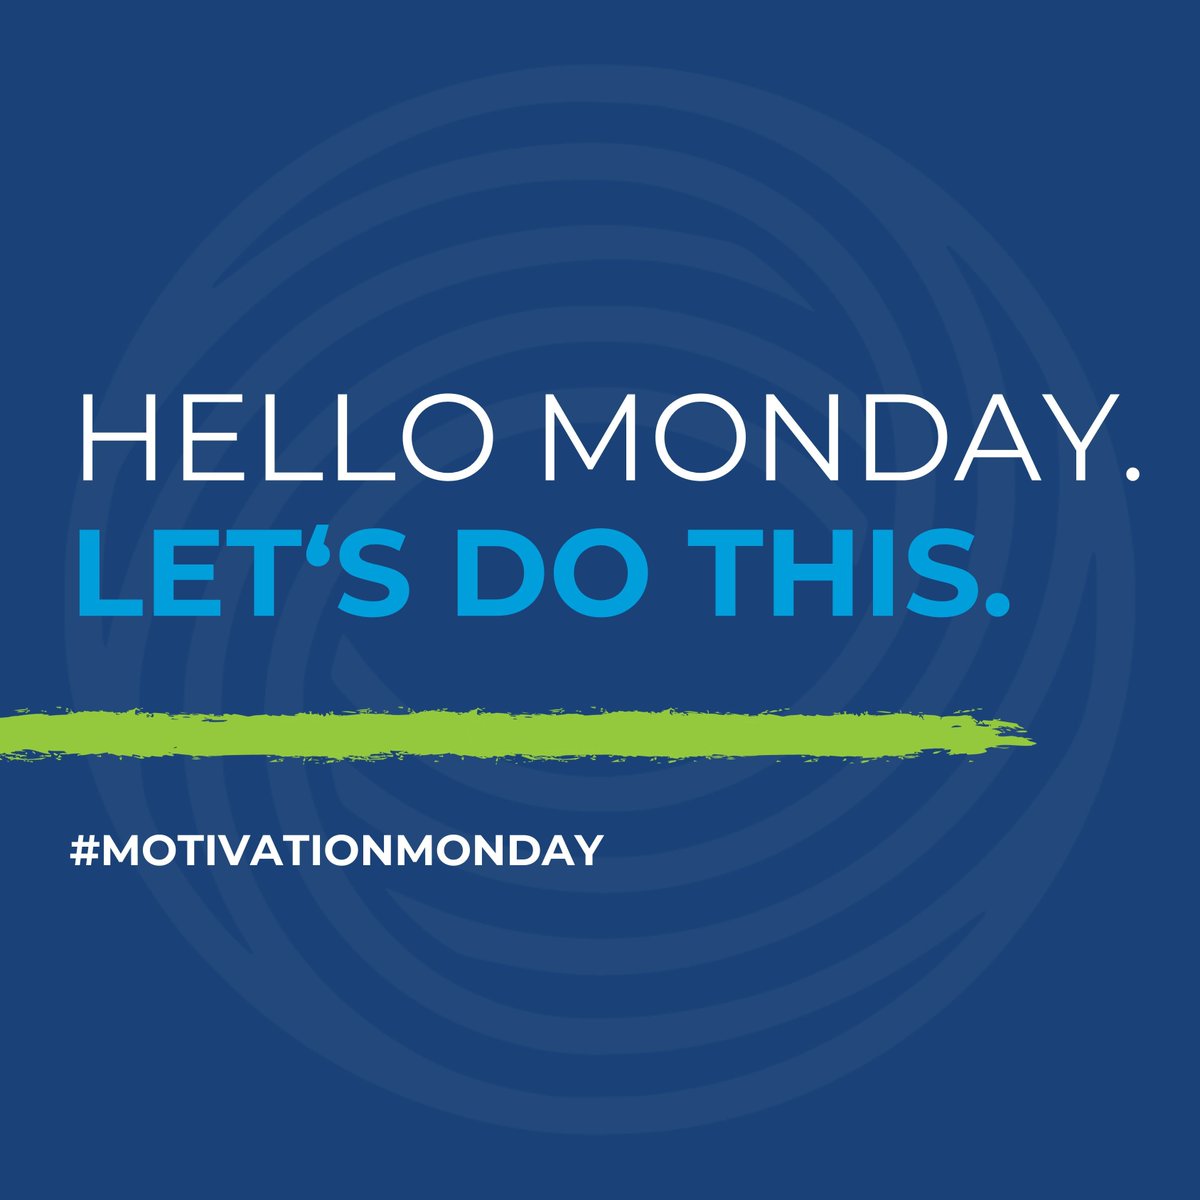 Happy #MotivationMonday, everyone! We at Team Alliance are ready to start our week and chase our dreams. Are you?